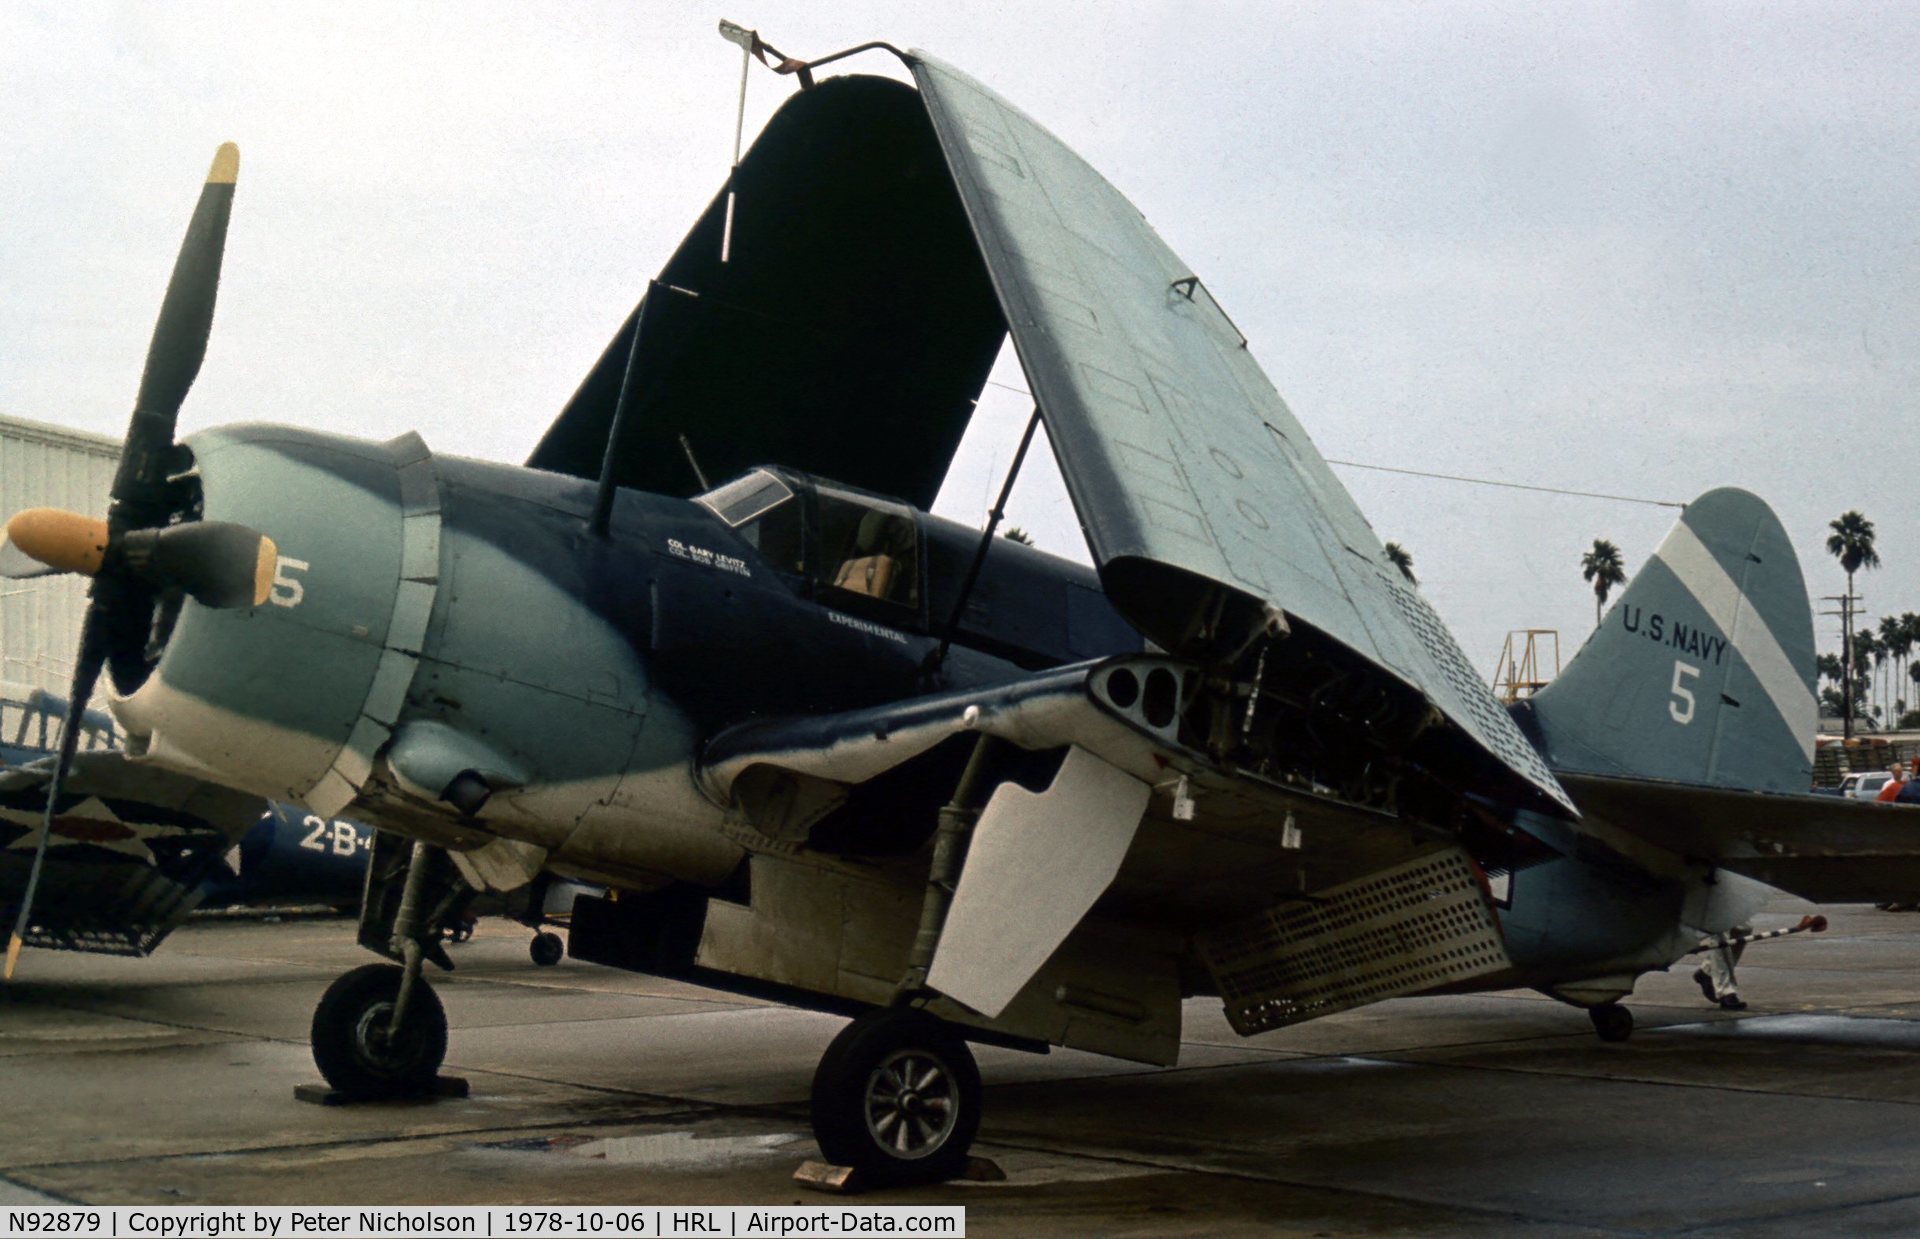 N92879, 1944 Curtiss SB2C-5 Helldiver C/N 83725, Another view of the Confederate Air Force's Helldiver at the 1978 Airshow at Harlingen.